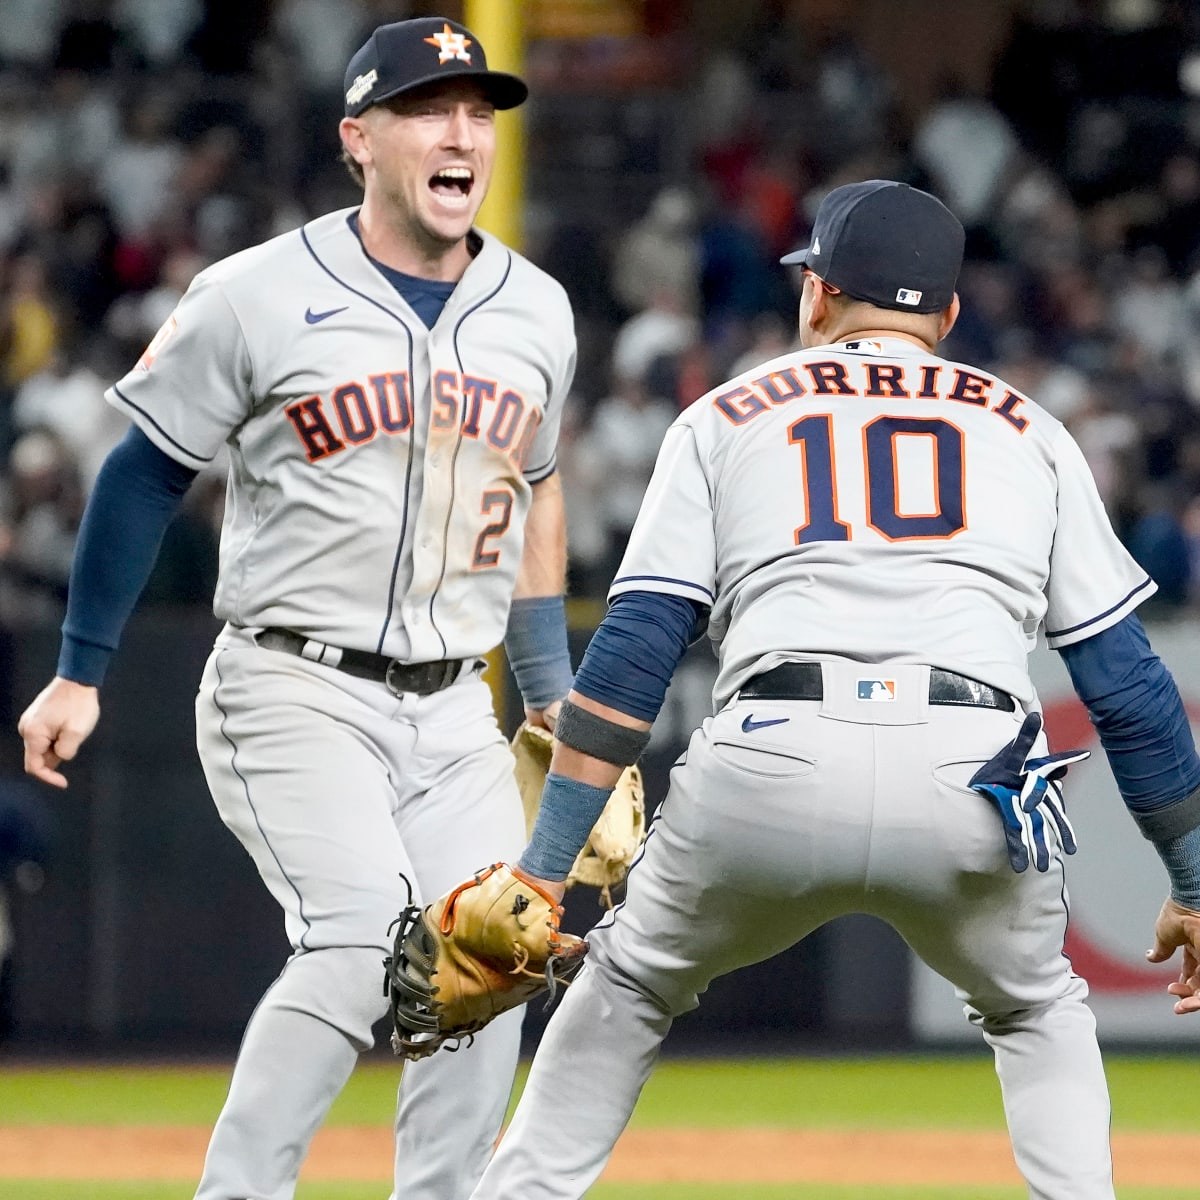 Congrats, Astros! The Stros have won the American League West for